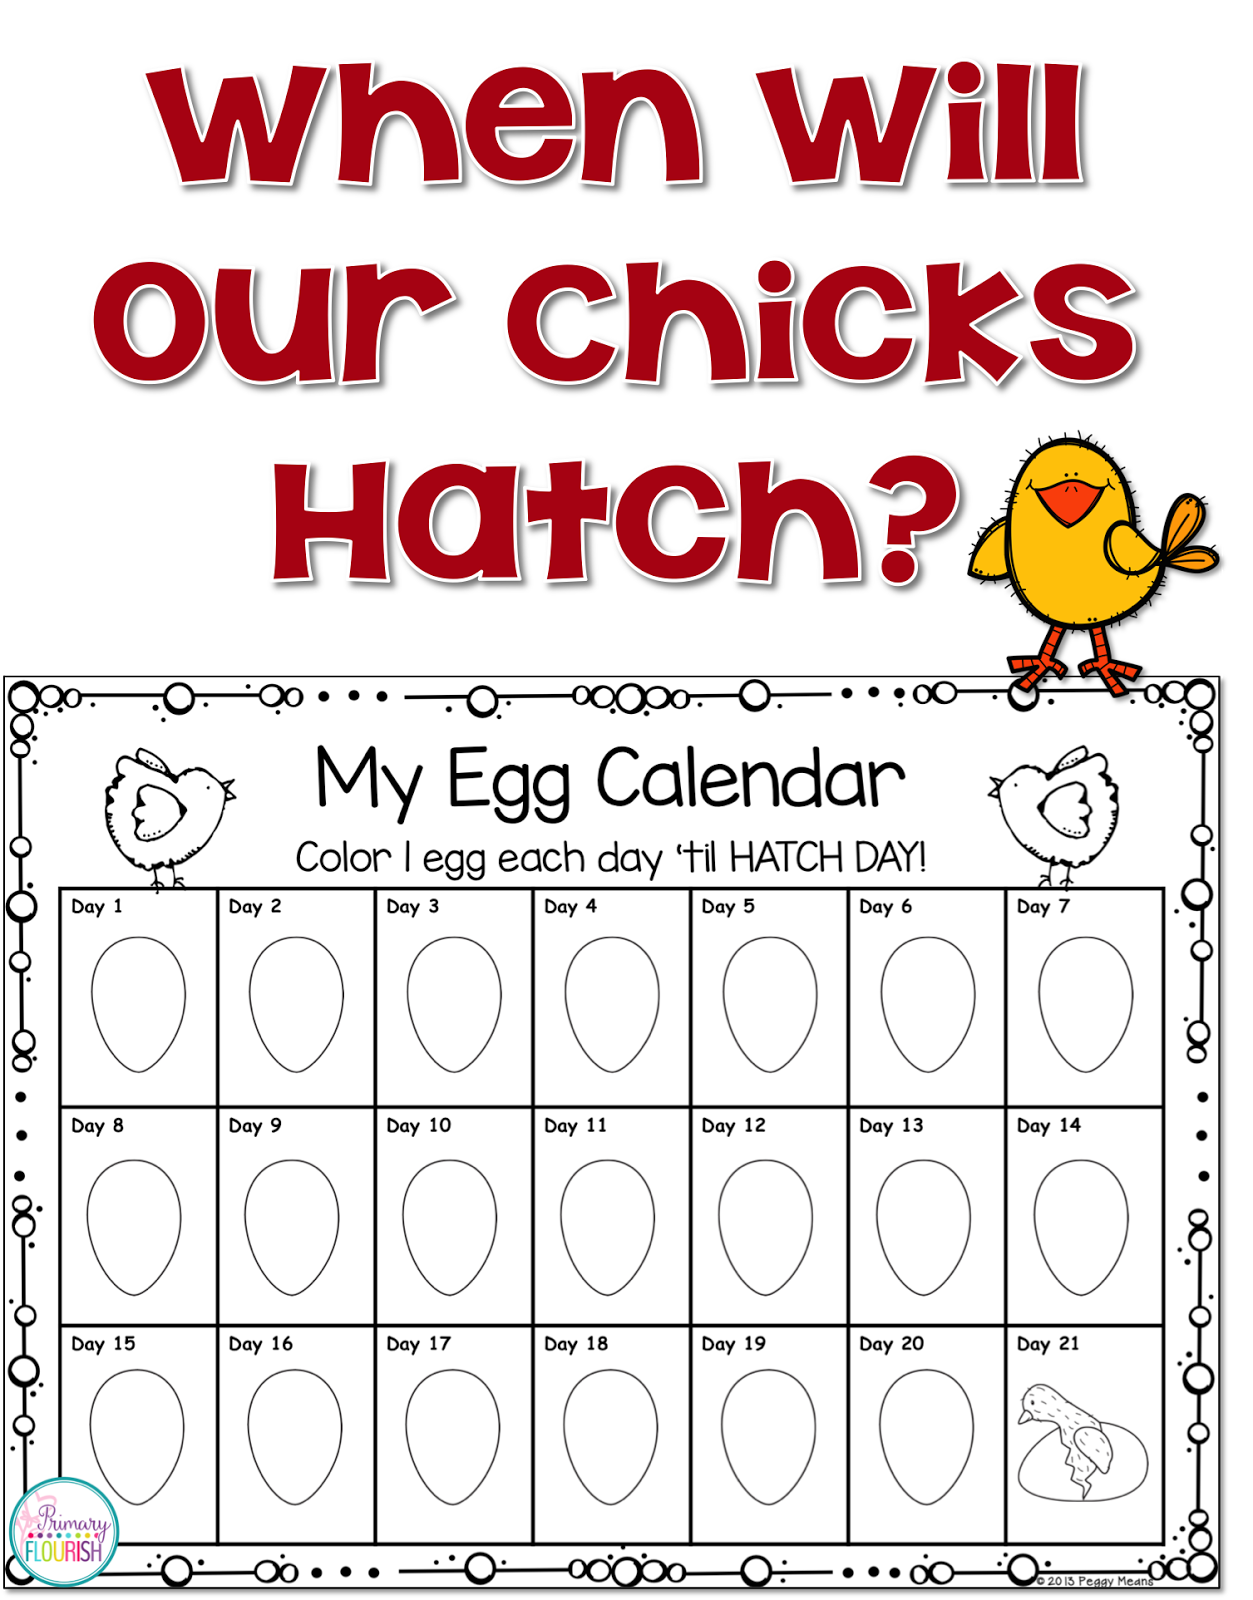 How to Hatch Chicks in the Classroom 101 Primary Flourish